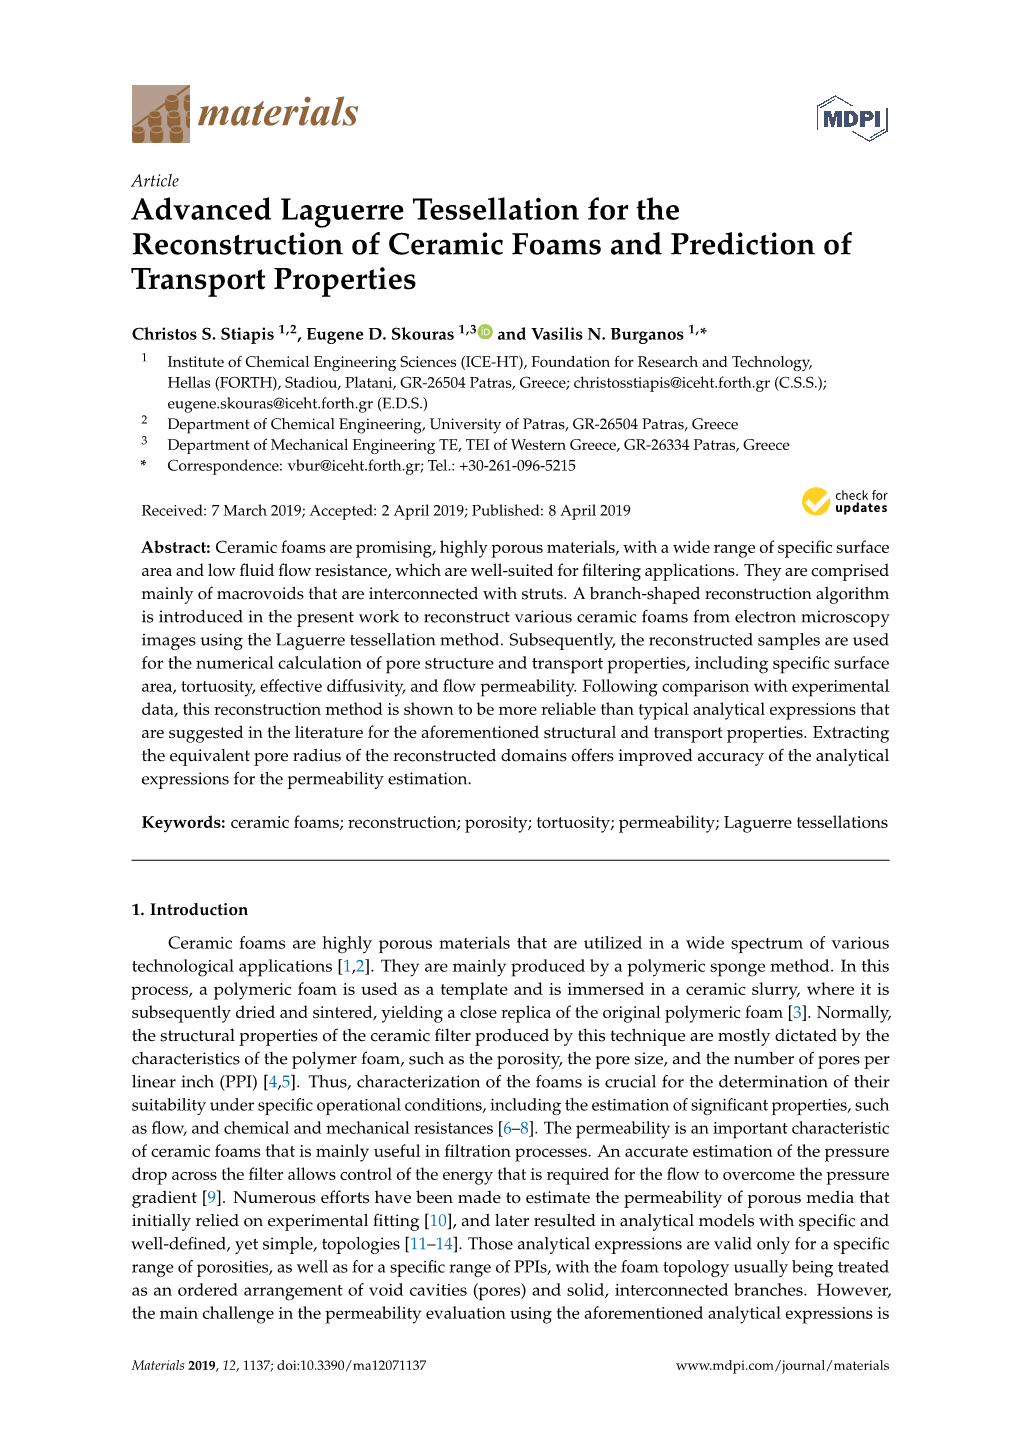 Advanced Laguerre Tessellation for the Reconstruction of Ceramic Foams and Prediction of Transport Properties